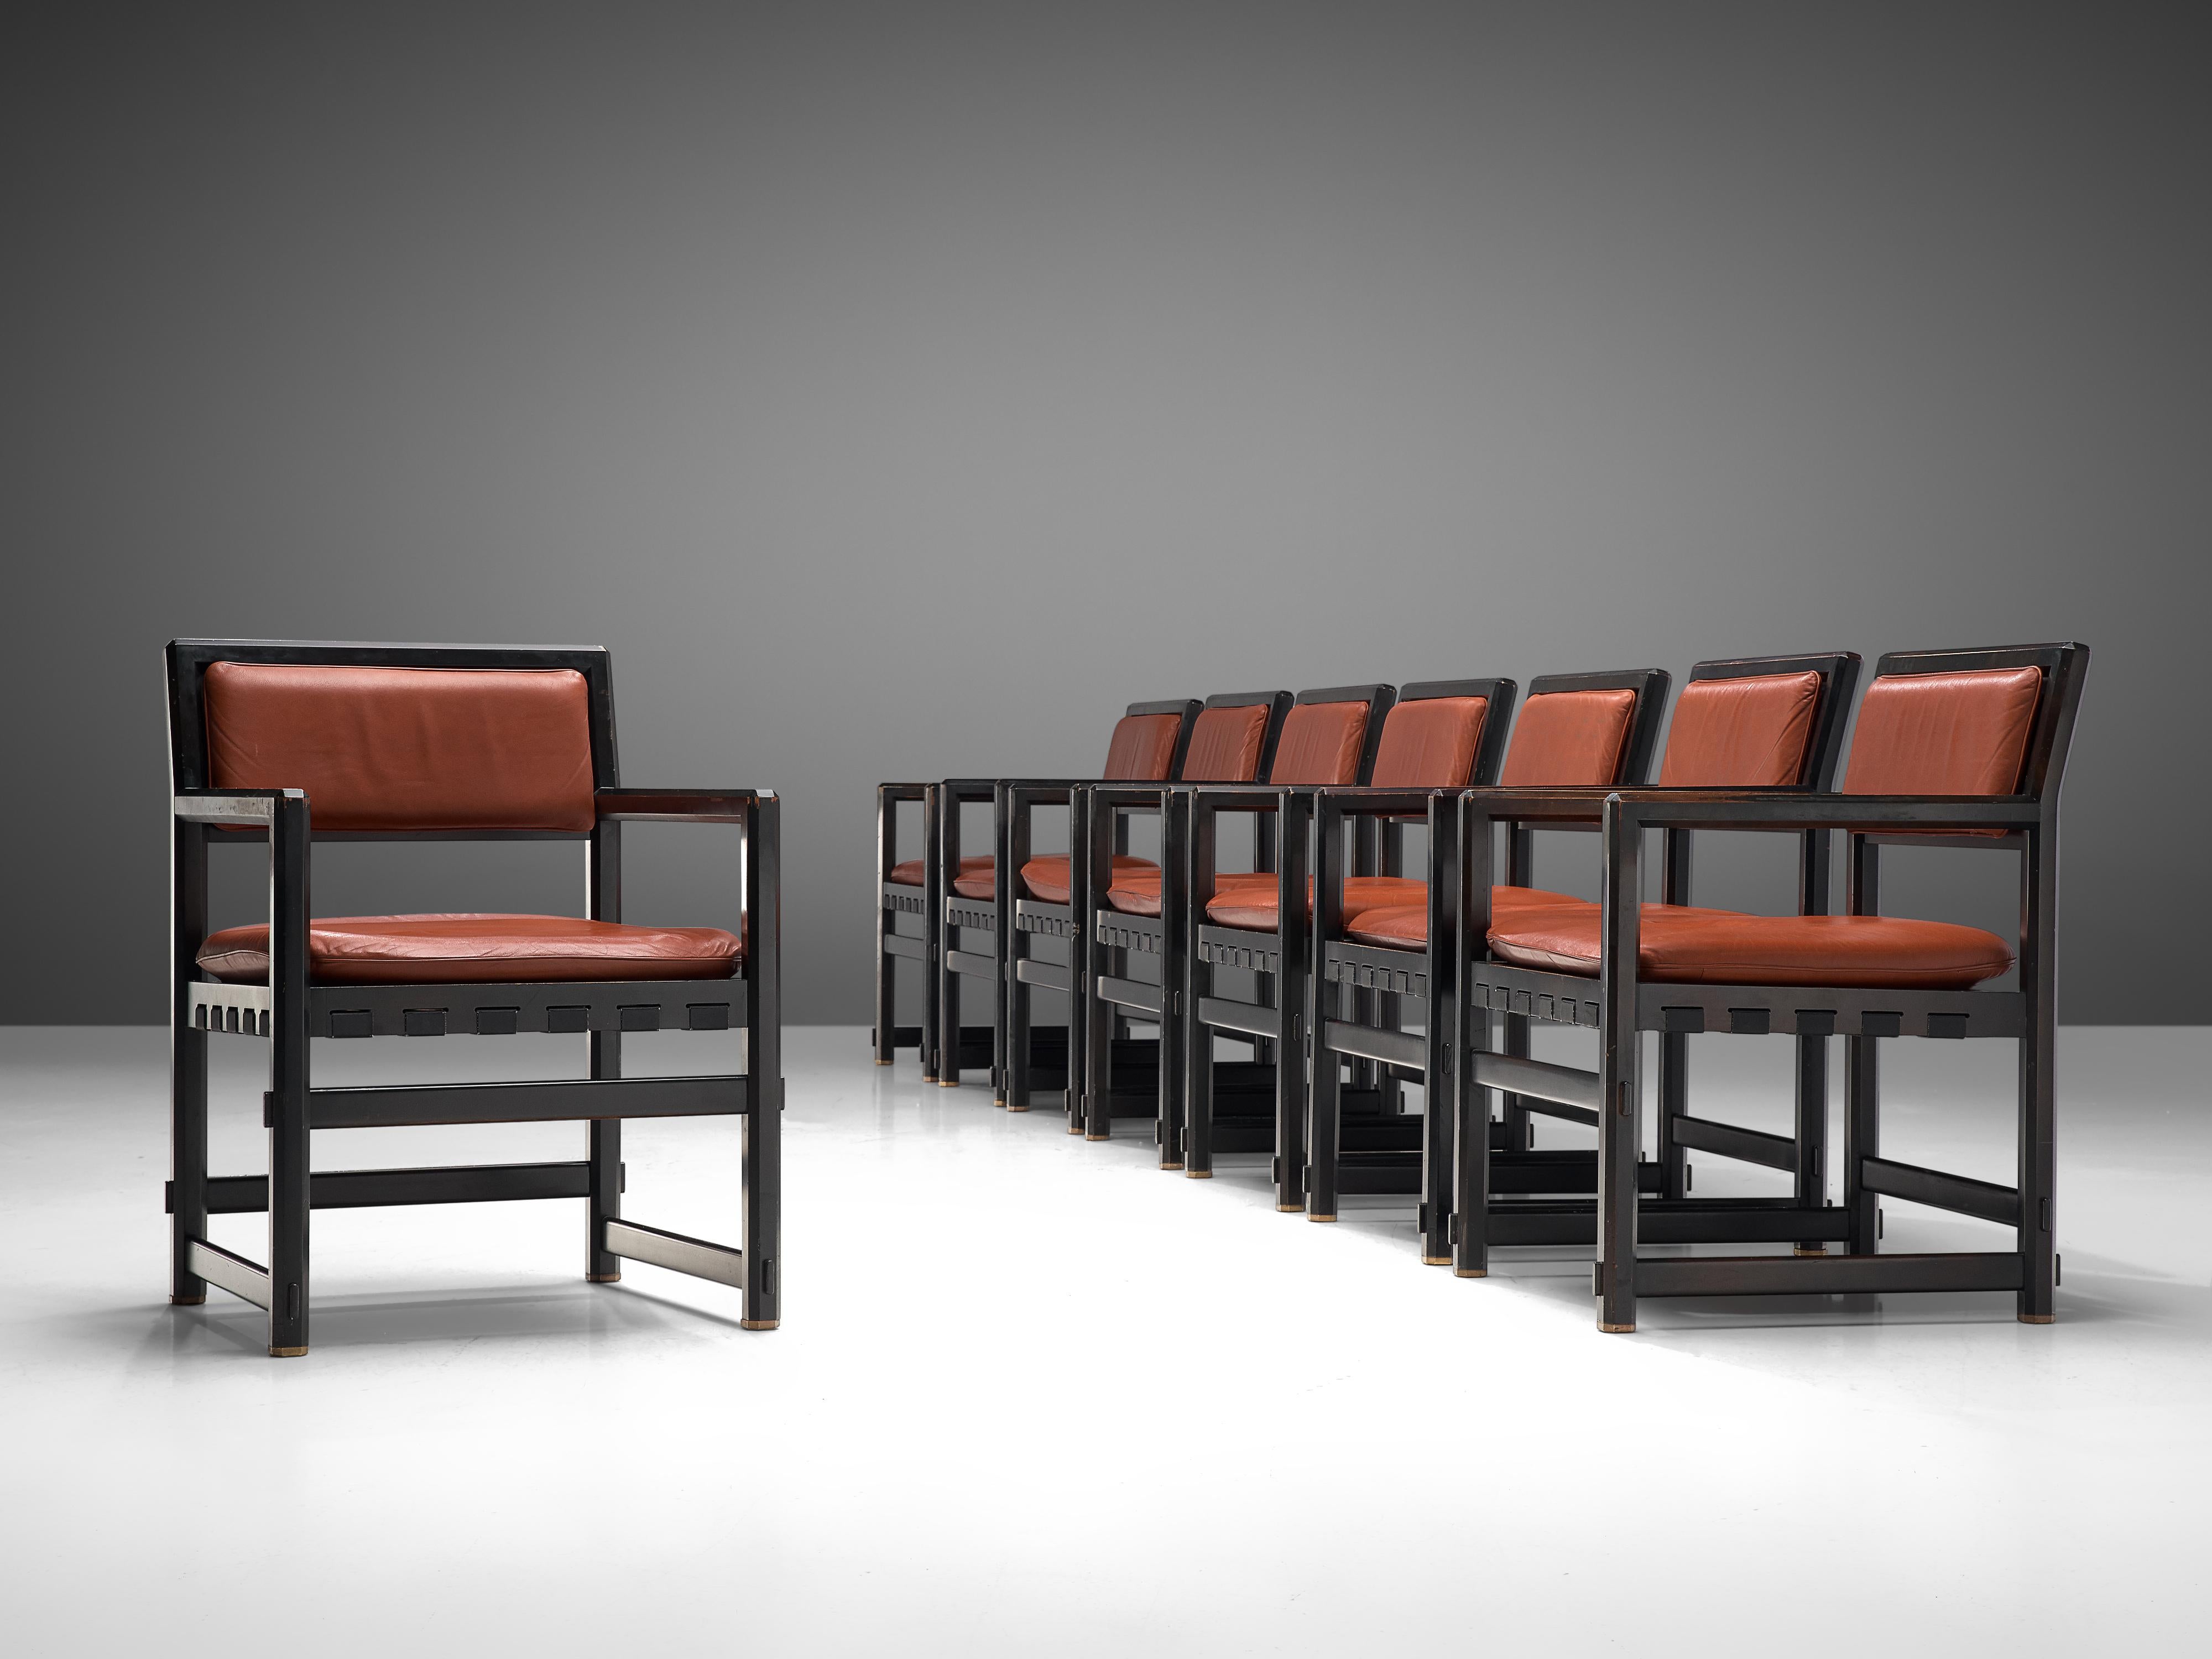 Edward Wormley for Dunbar by Mobilier Universel, set of eight armchairs model 5762, lacquered black wood, red leather, Belgium, design 1957

This set of eight grand armchairs by Edward Wormley designed in 1957 consists of a black lacquered frame and